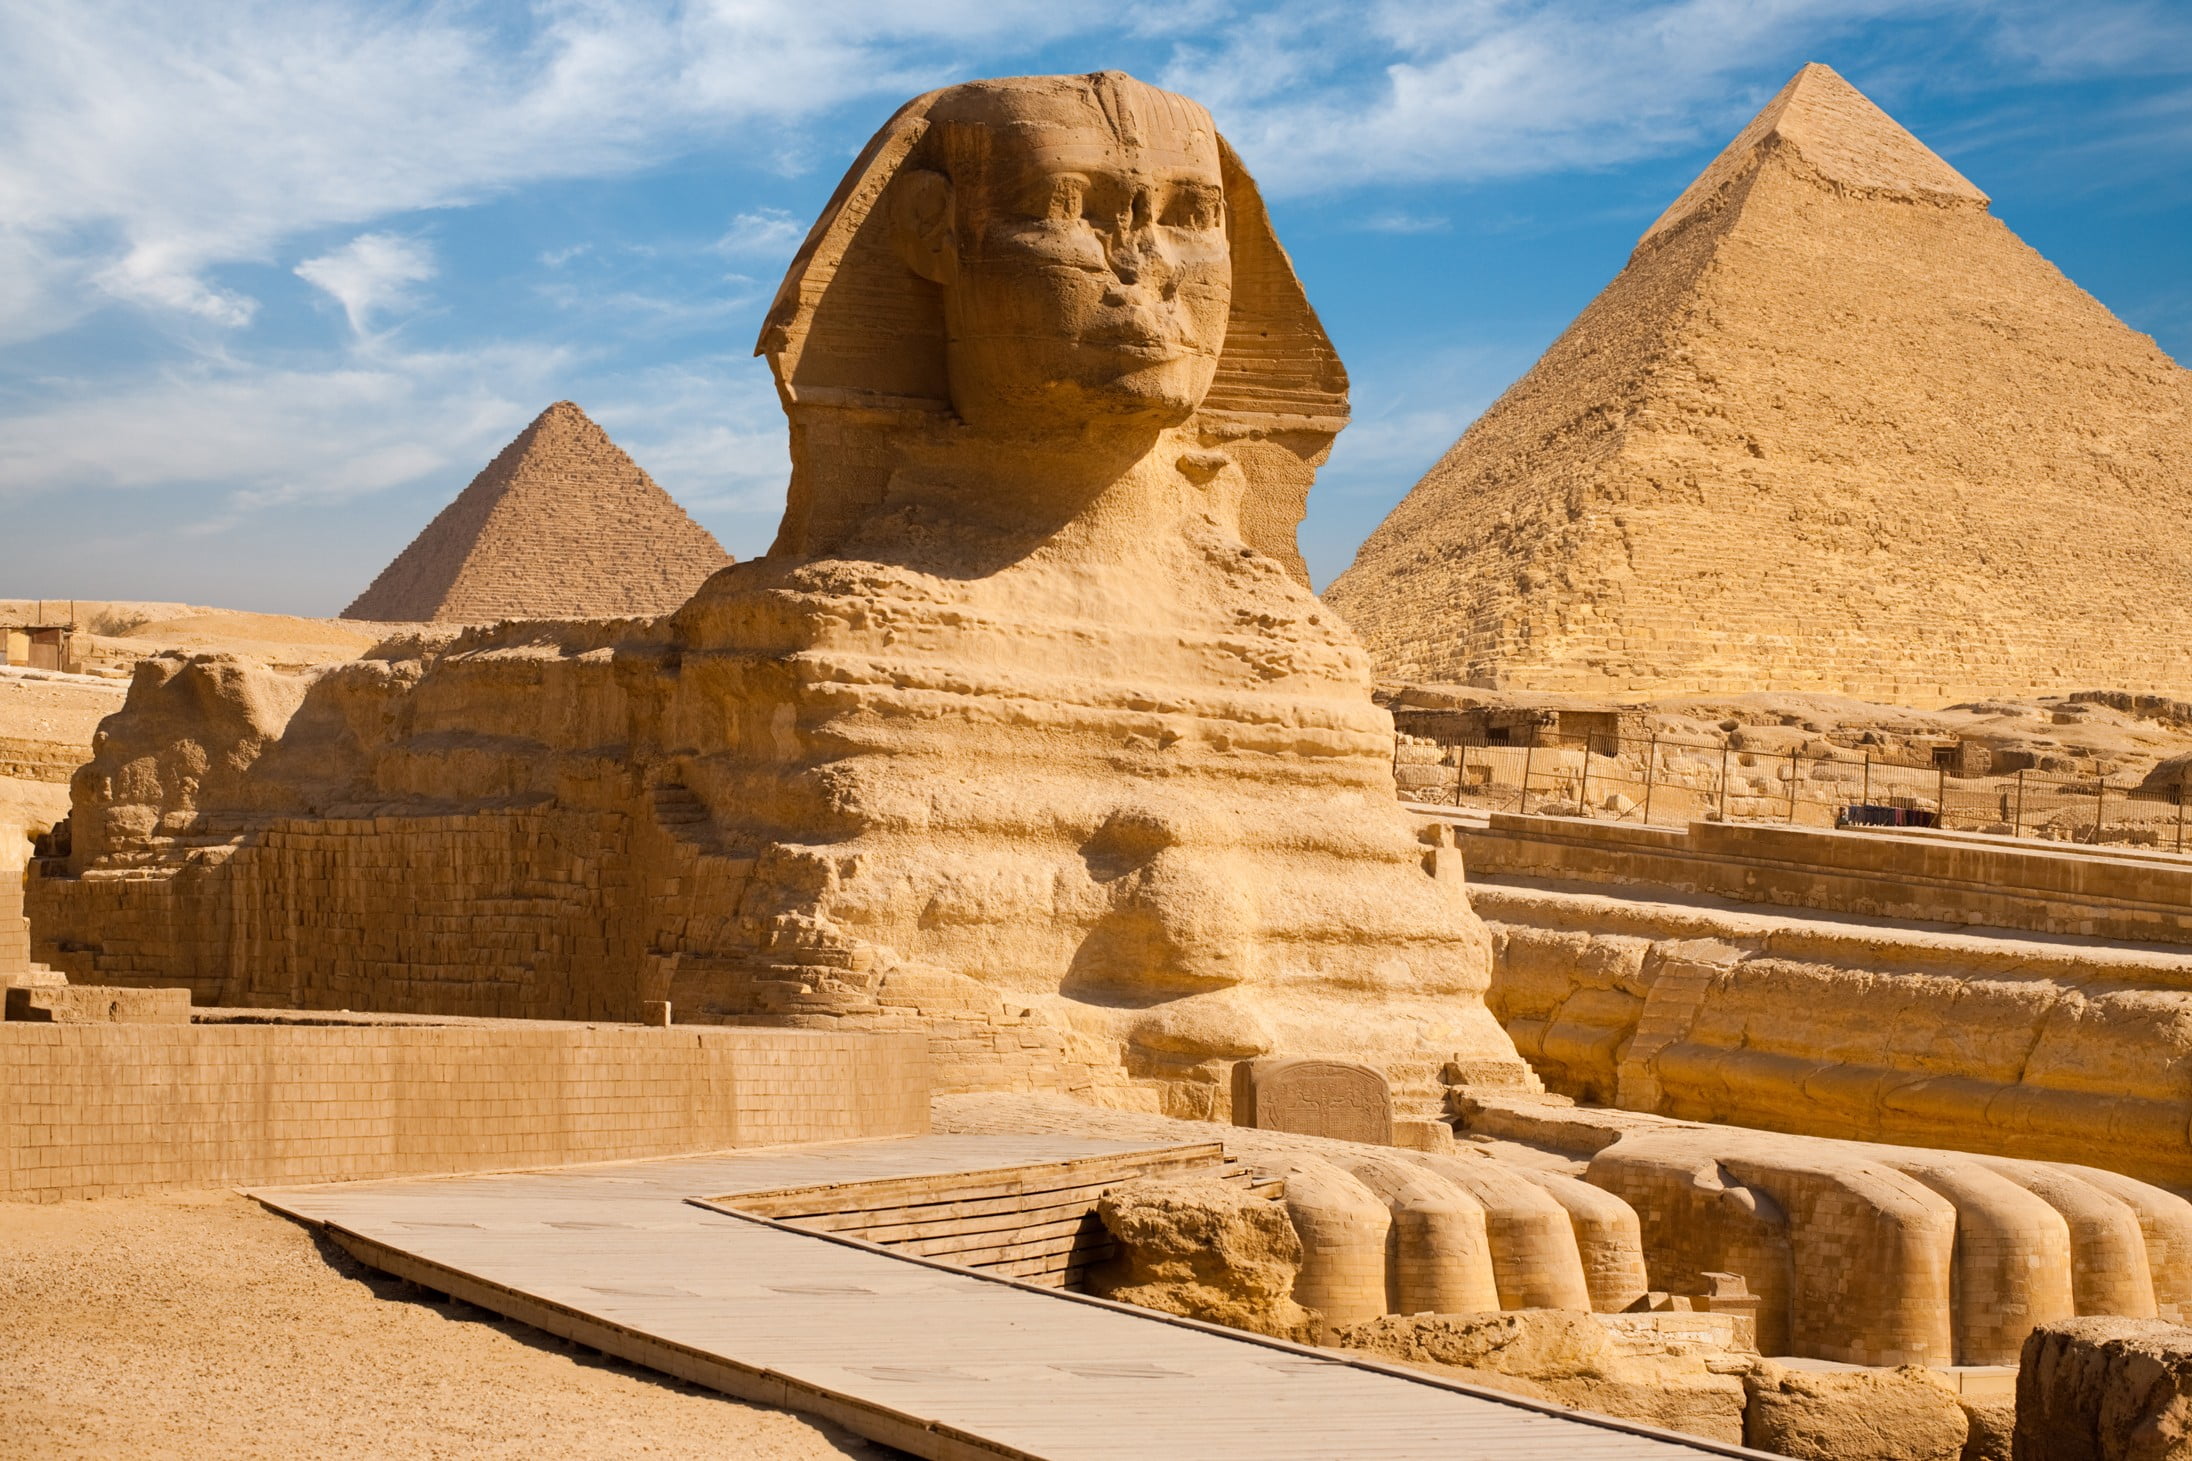 Sphinx, Egypt, sphynx, pyramid, old building, history, the past